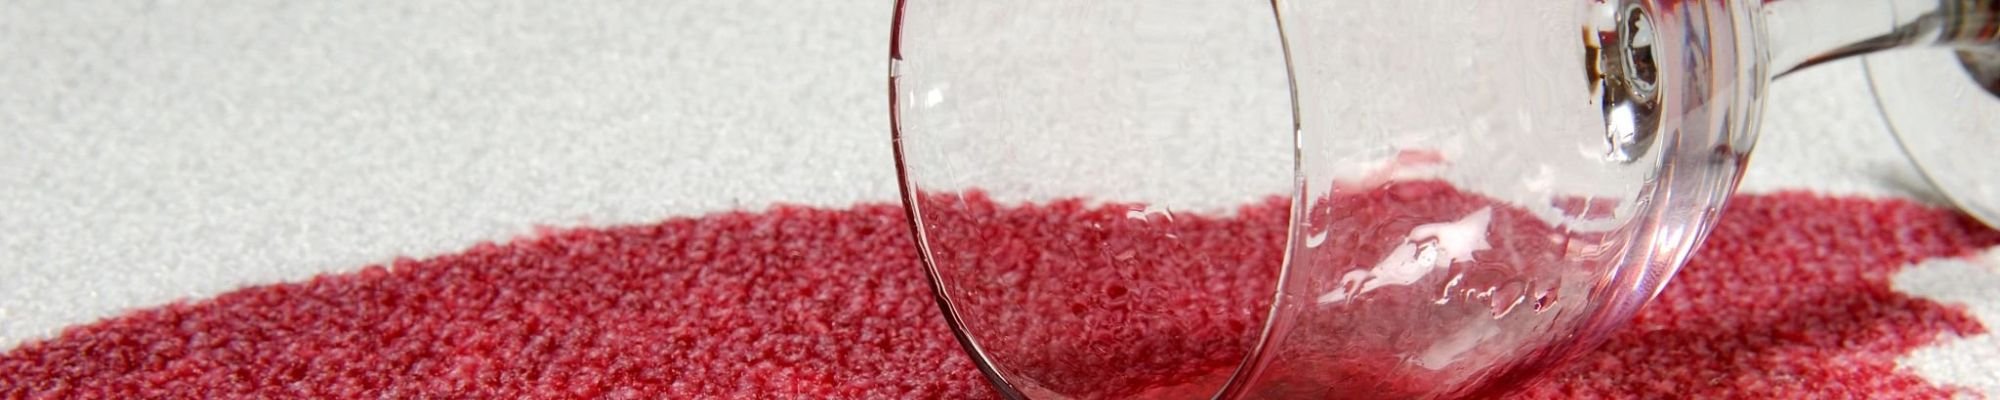 A glass of red wine spilled on white carpet from The Family Floor Store in Ellsworth, ME